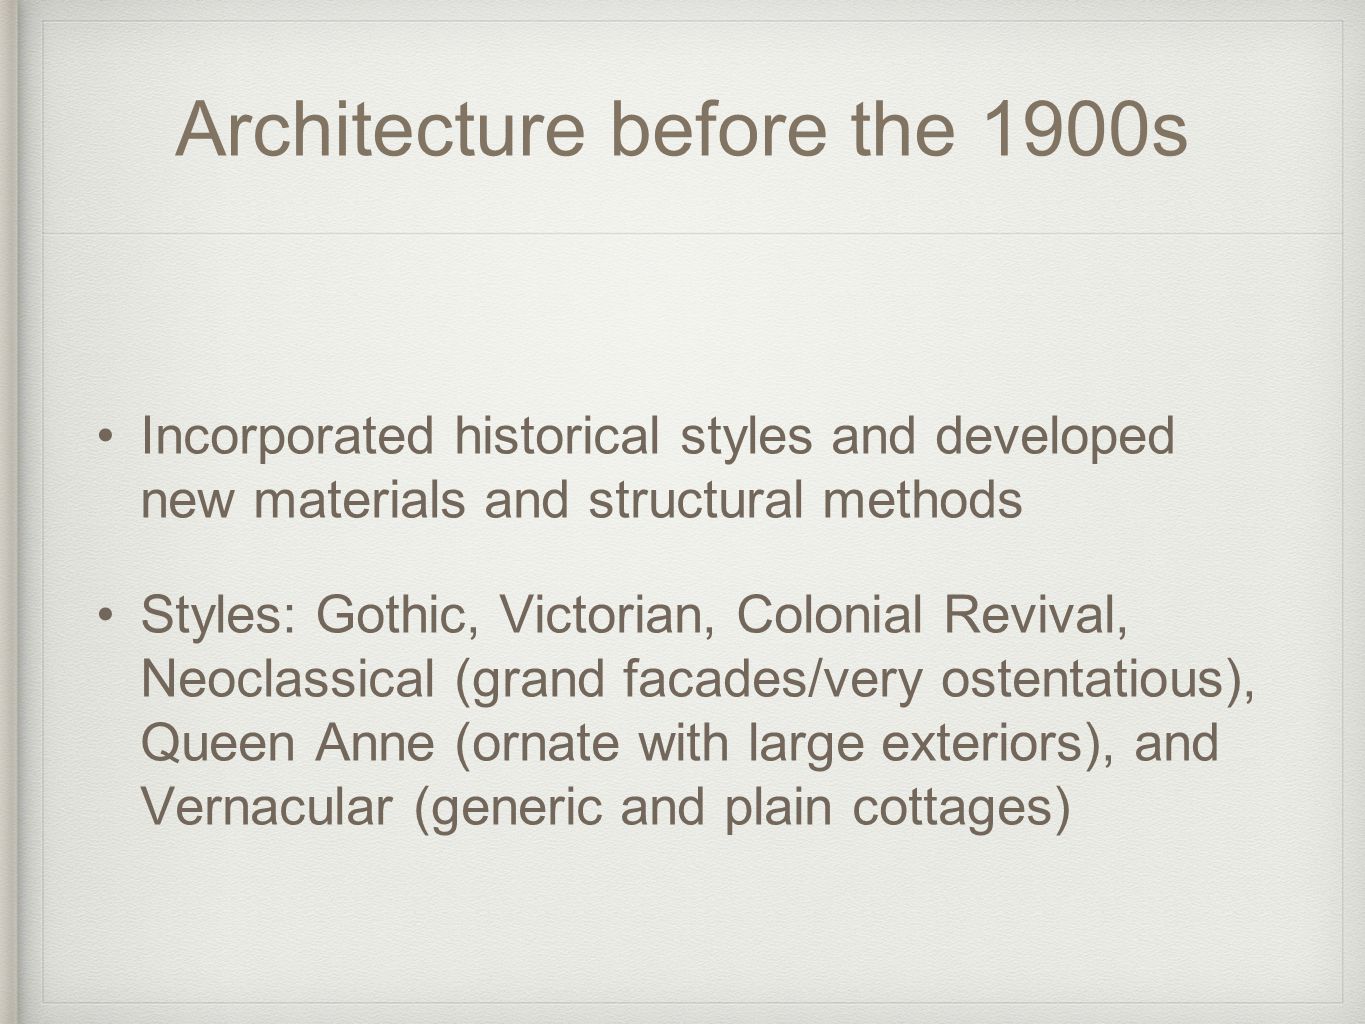 Architecture before the 1900s